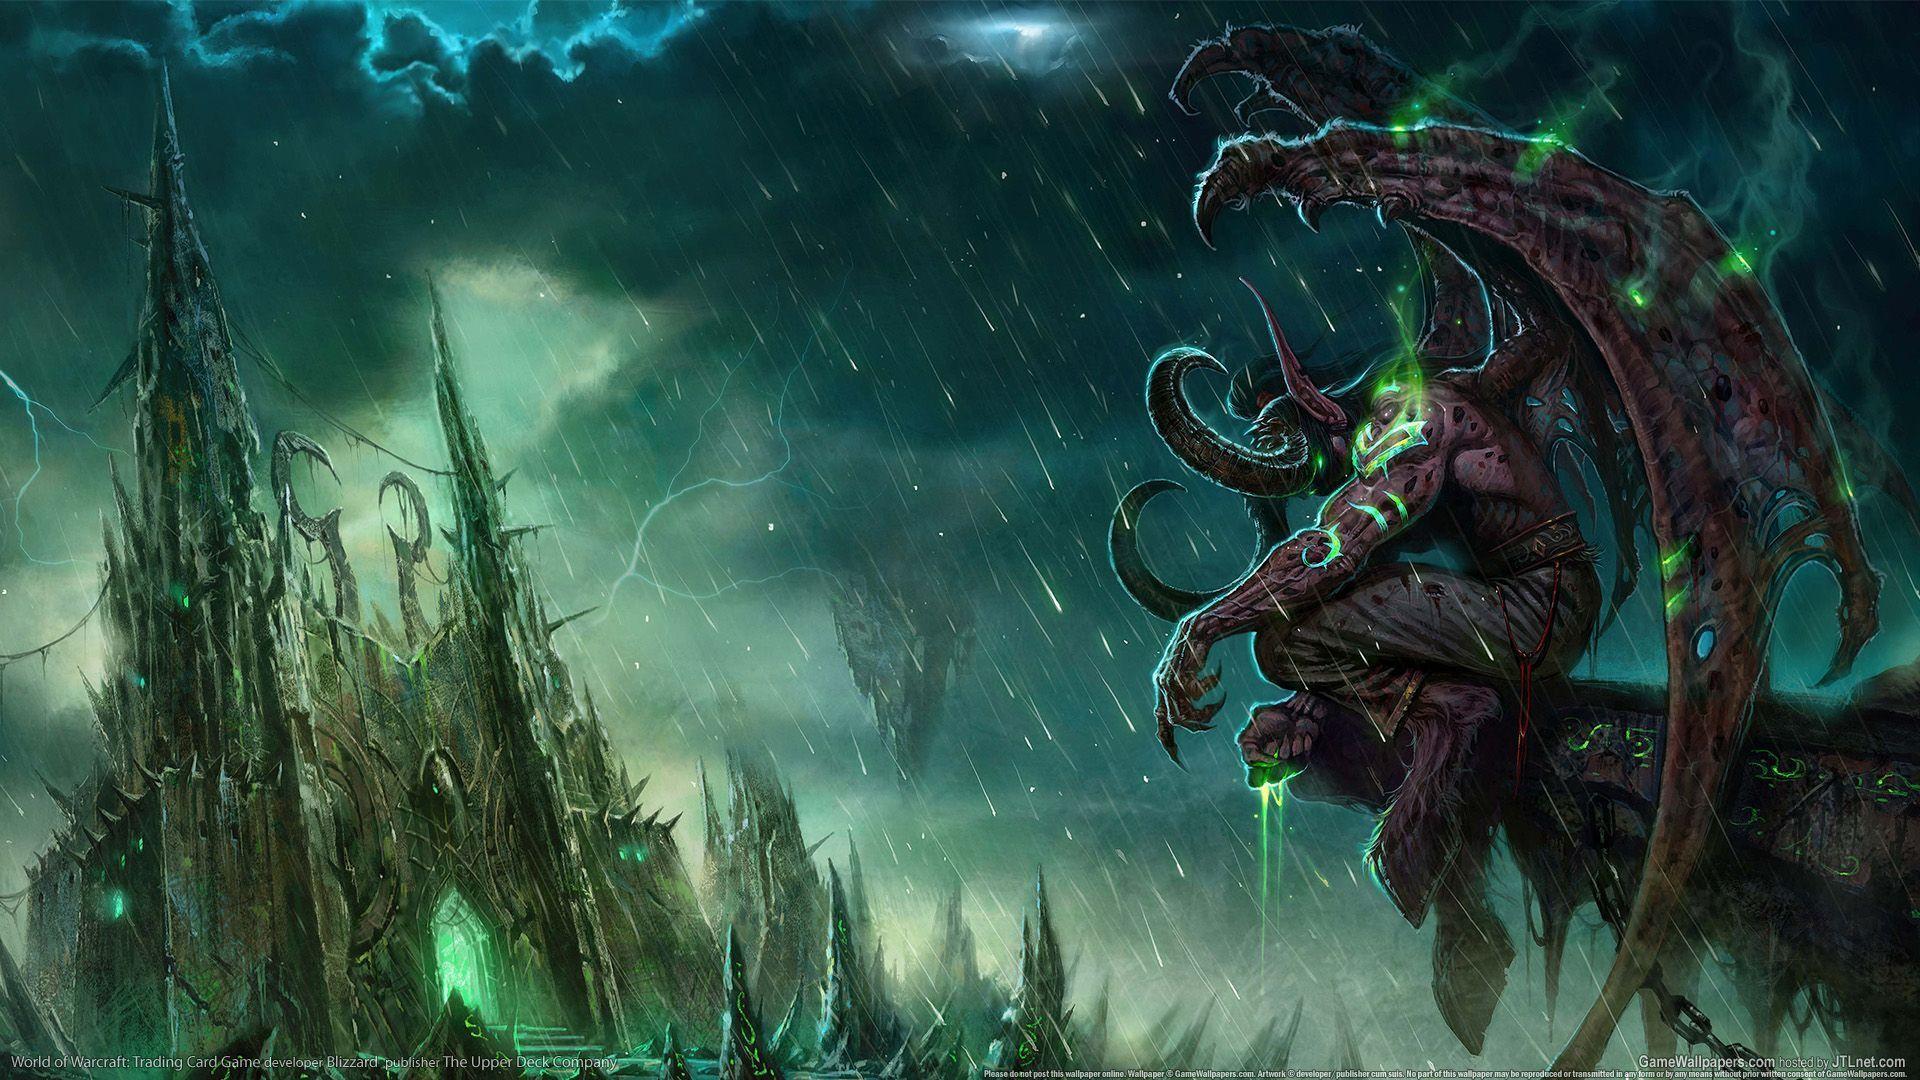 world of warcraft wallpapers Wallpapers